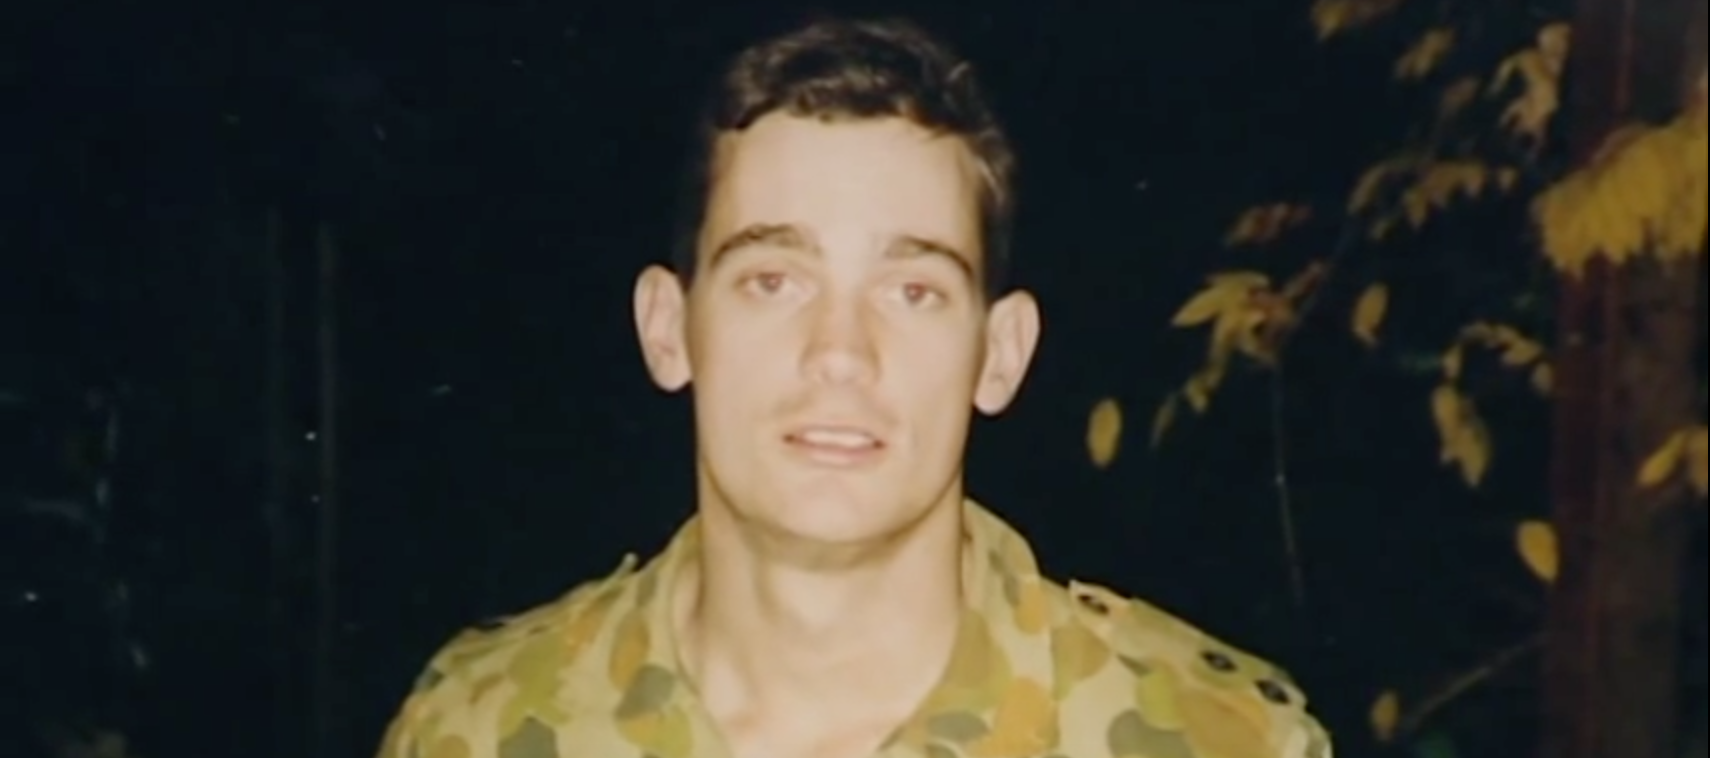 Aussie Army soldier missing for 17 years may have led a ‘double life’